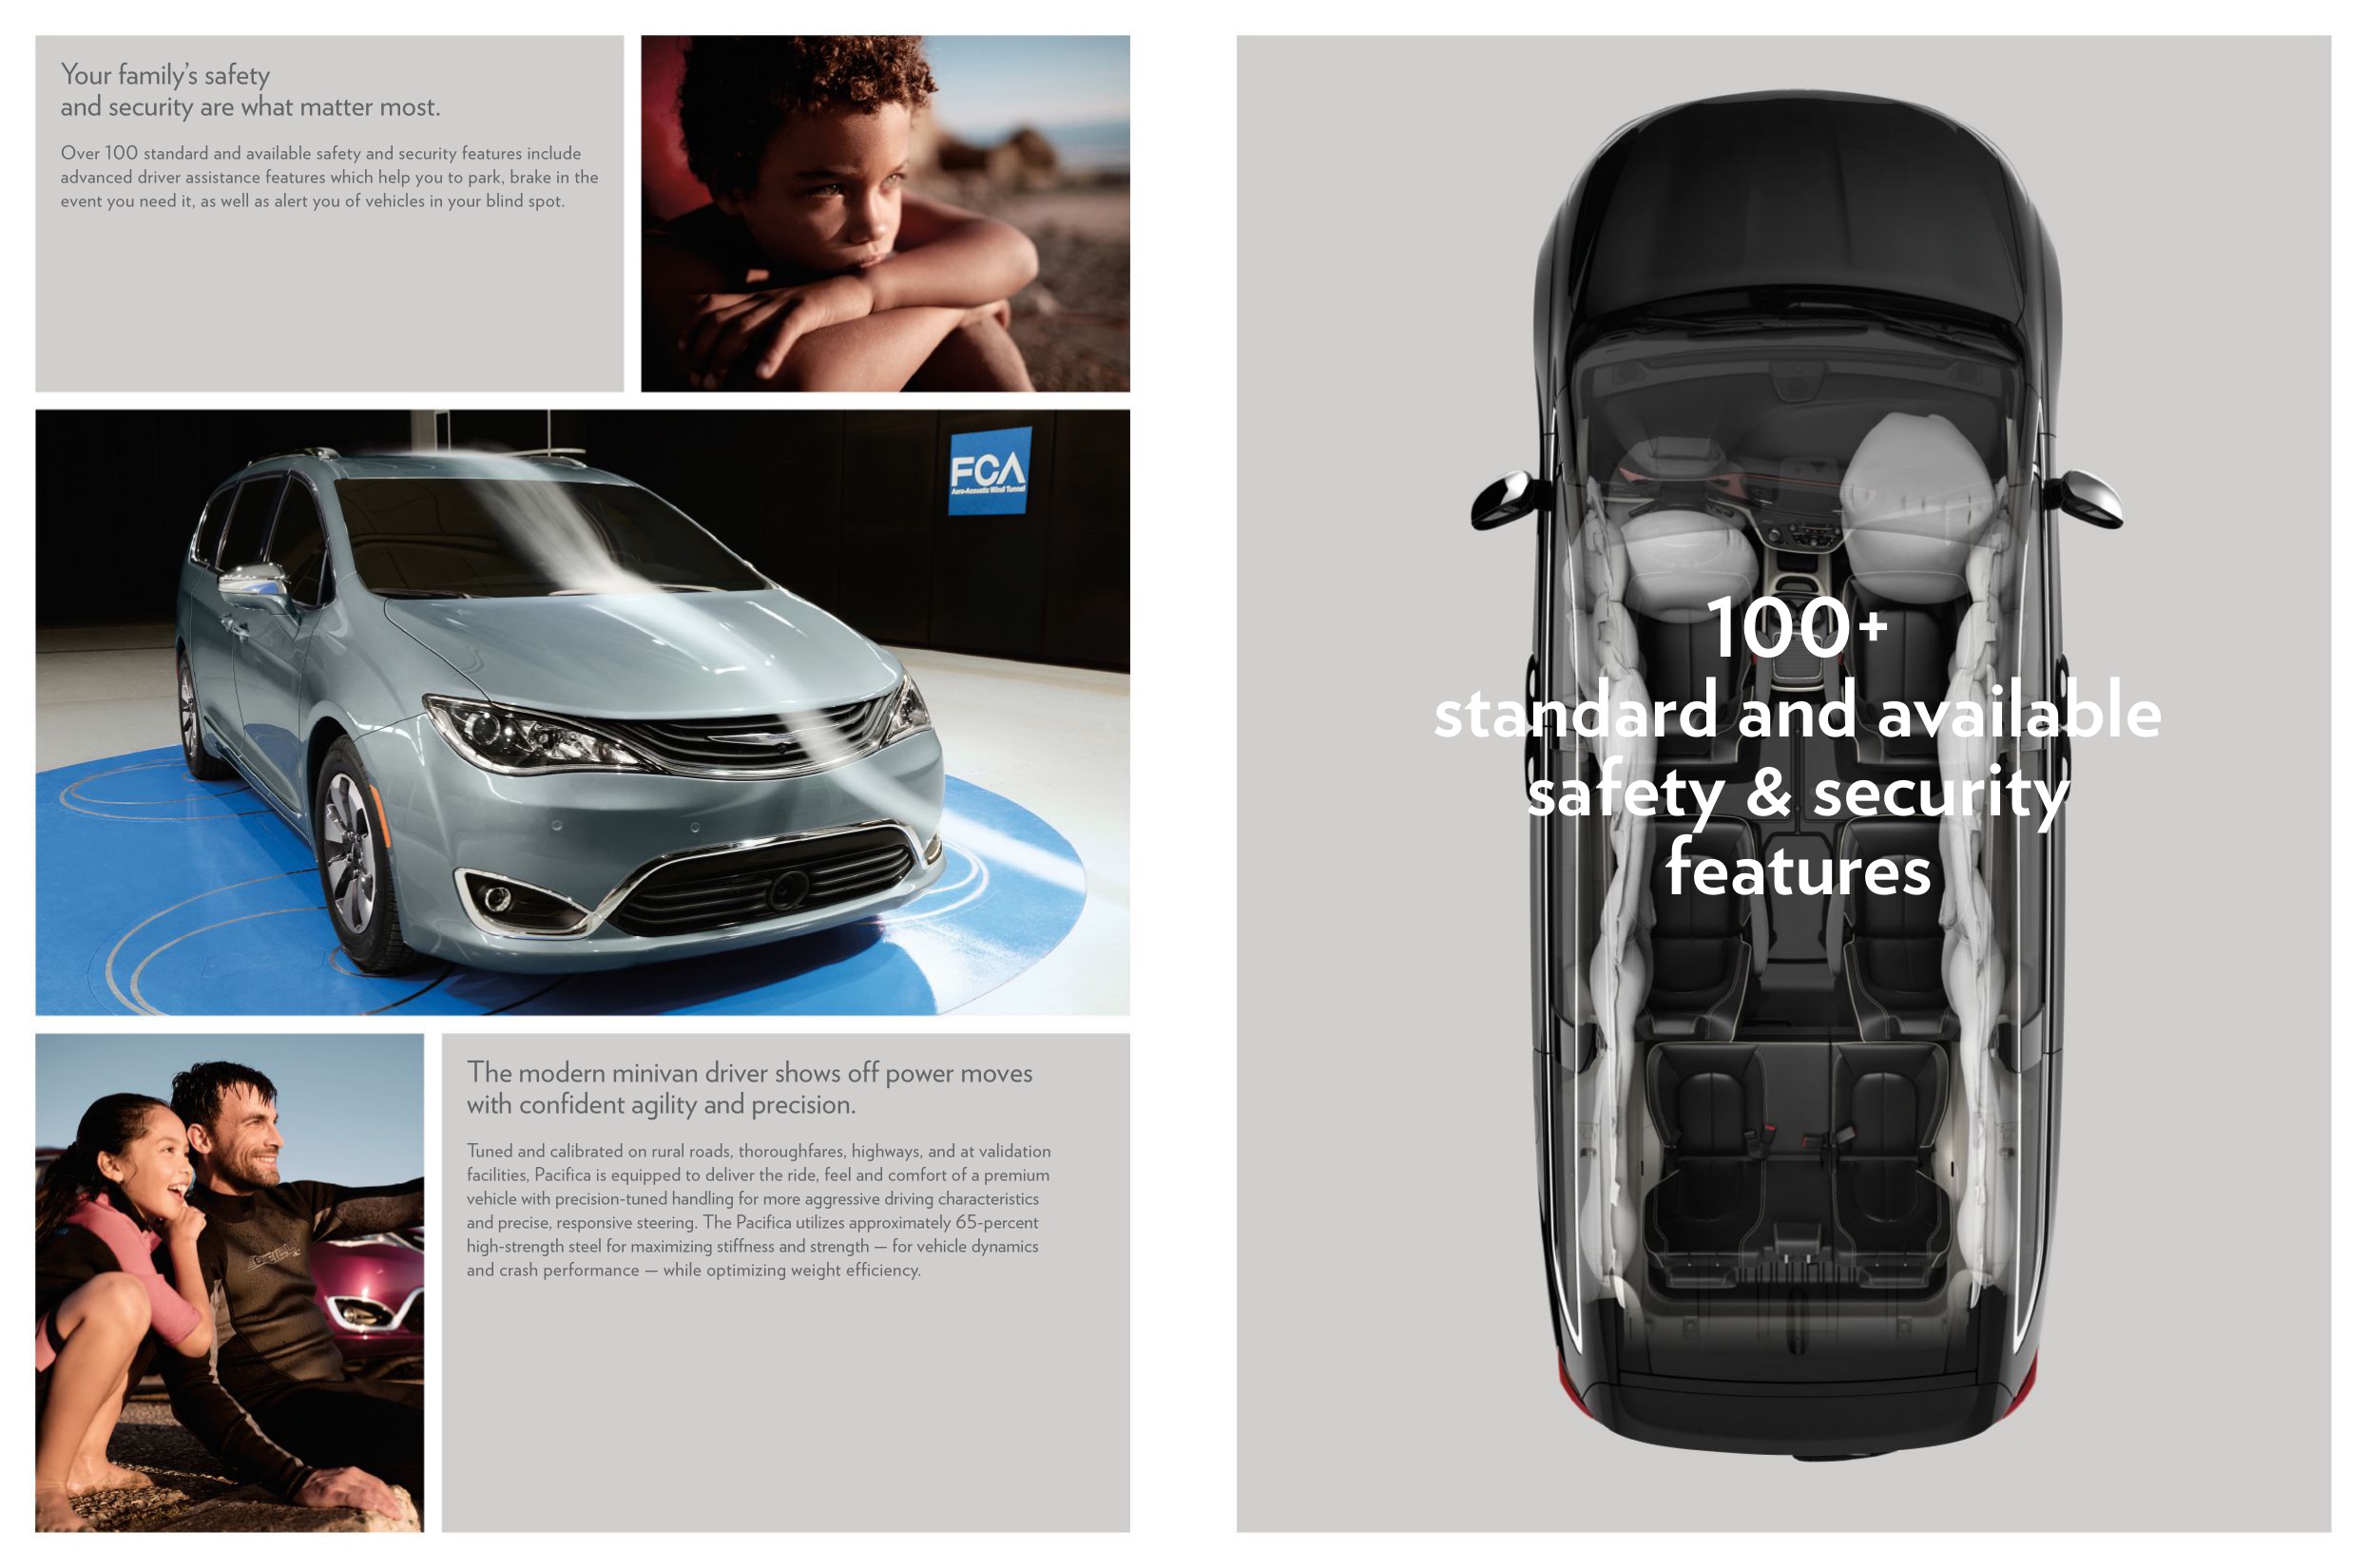 2017 Chrysler Pacifica Brochure Page 26